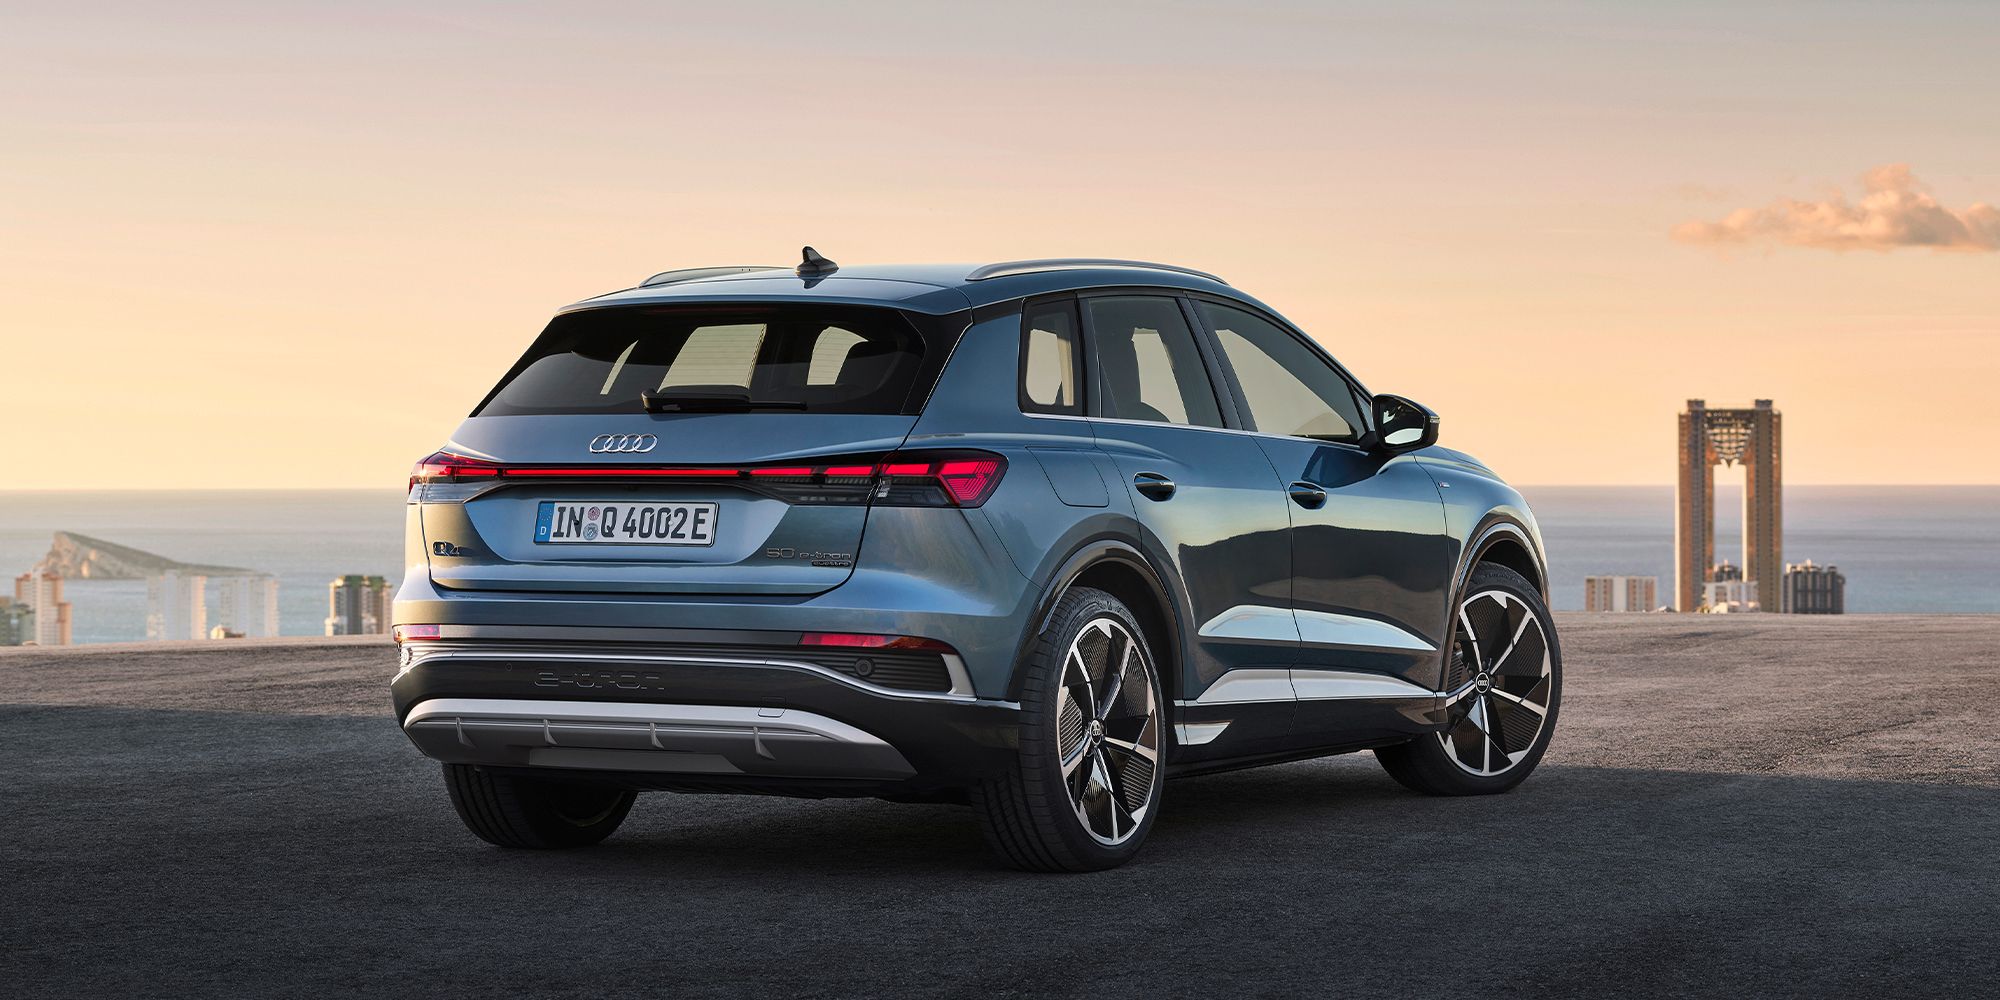 The rear of the new Q4 e-tron